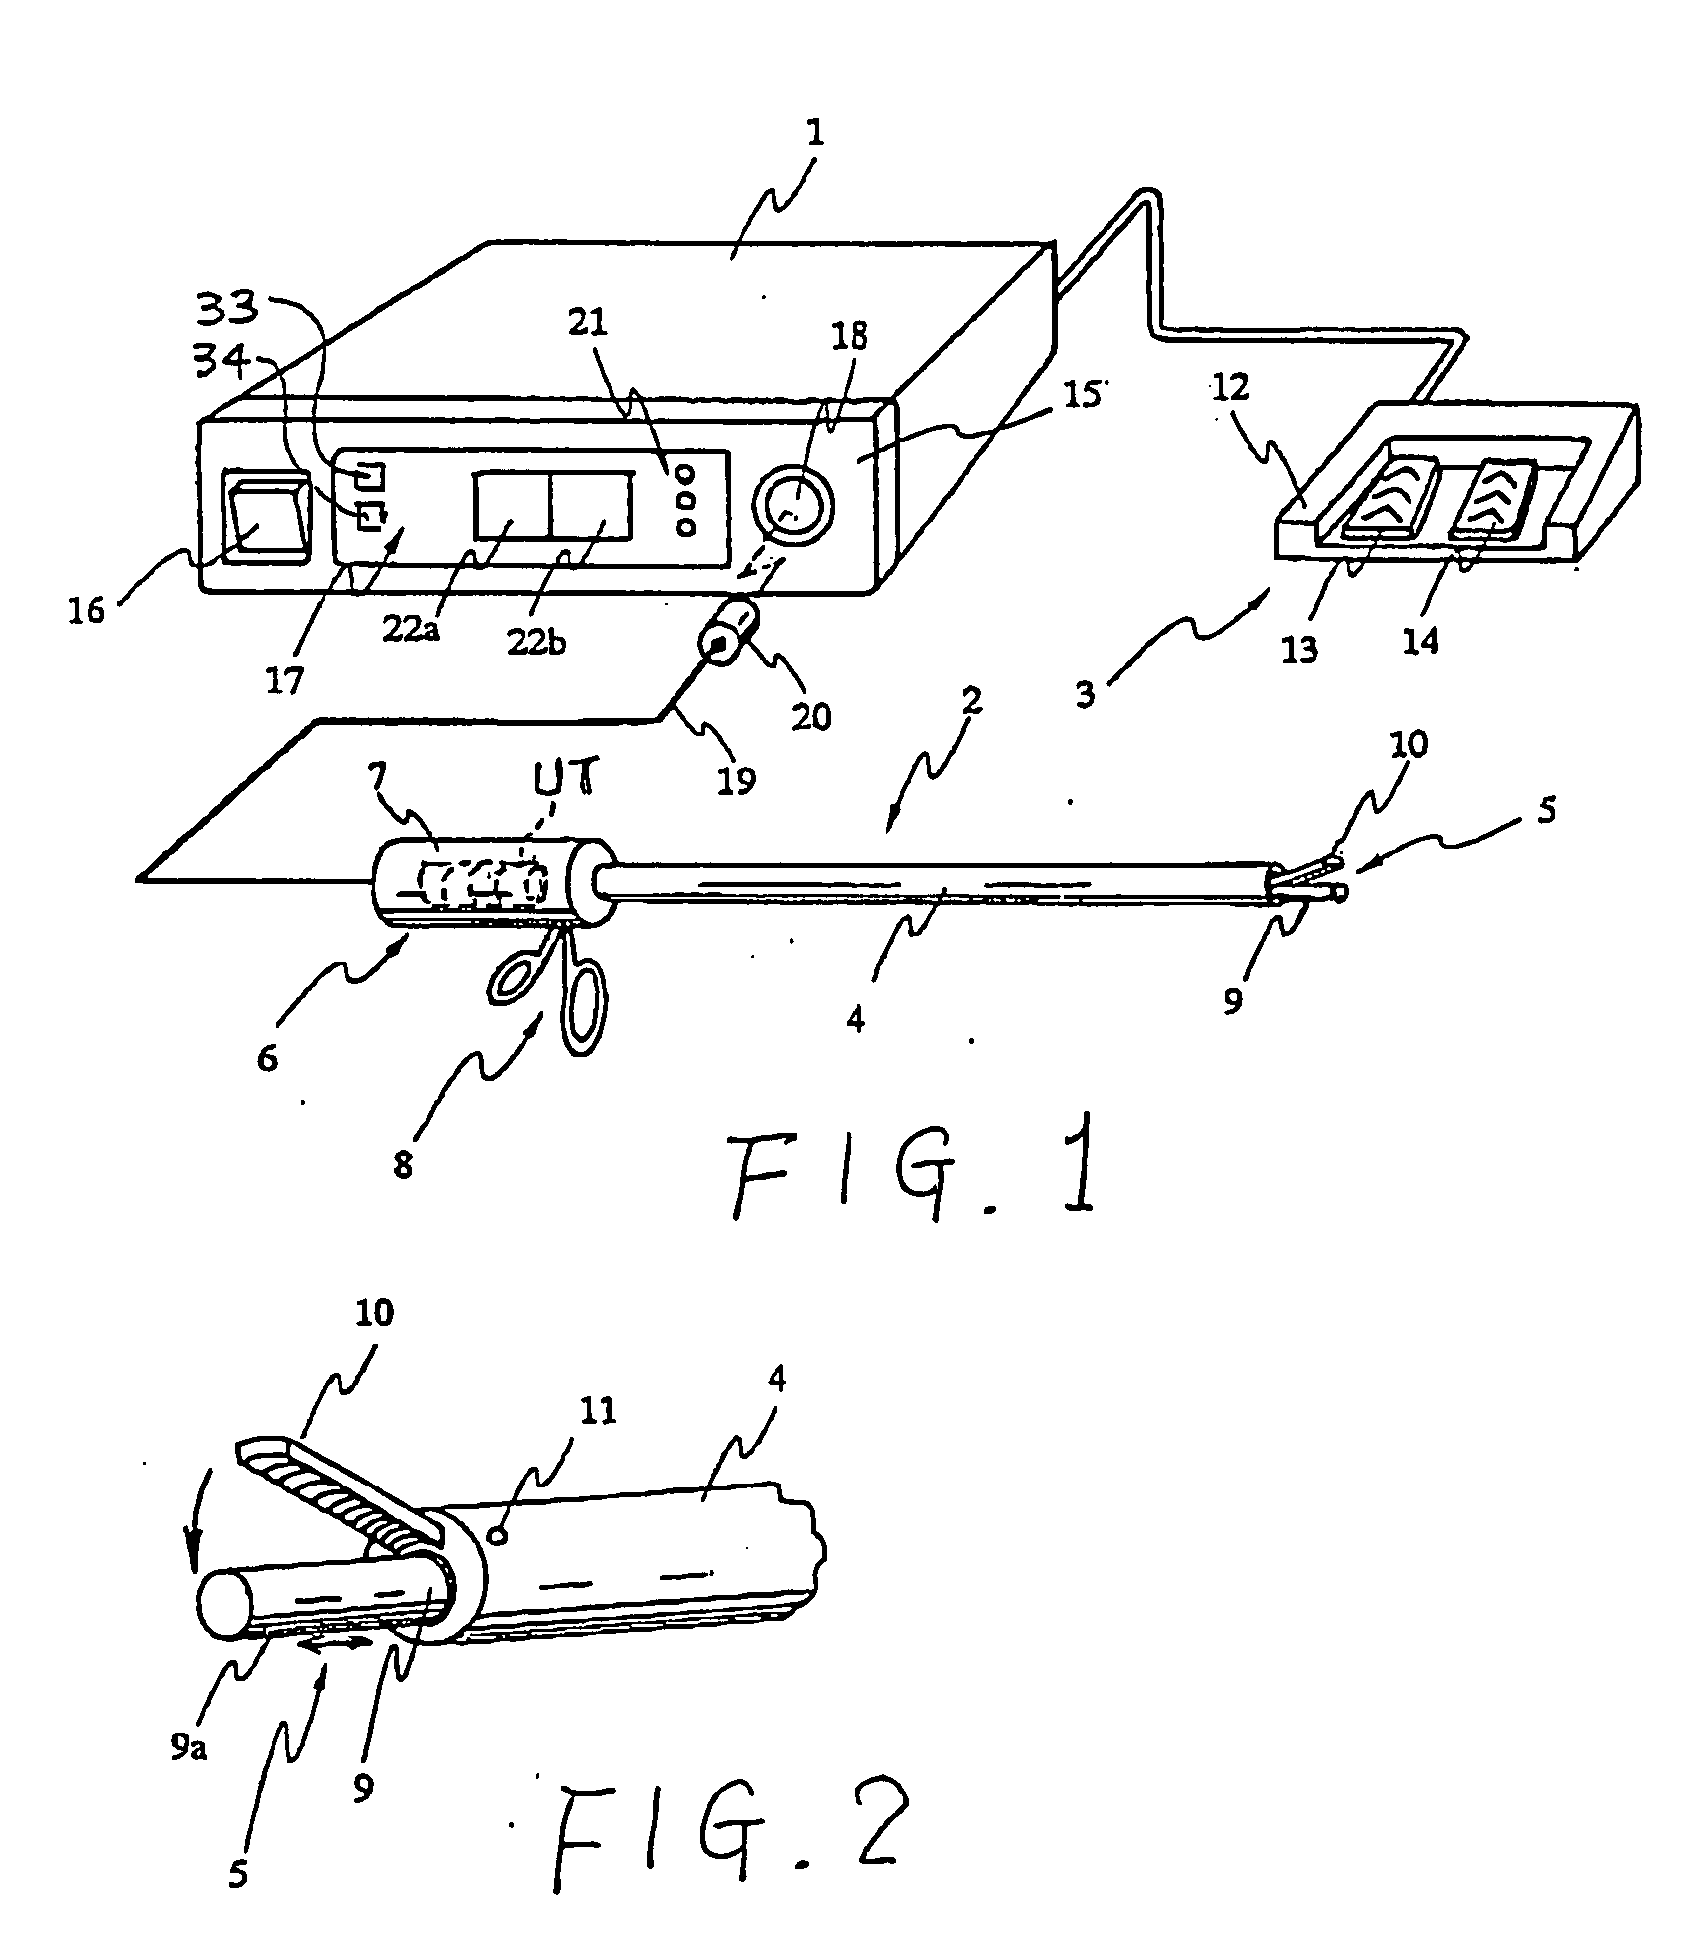 Ultrasonic surgical apparatus with treatment modes selectable